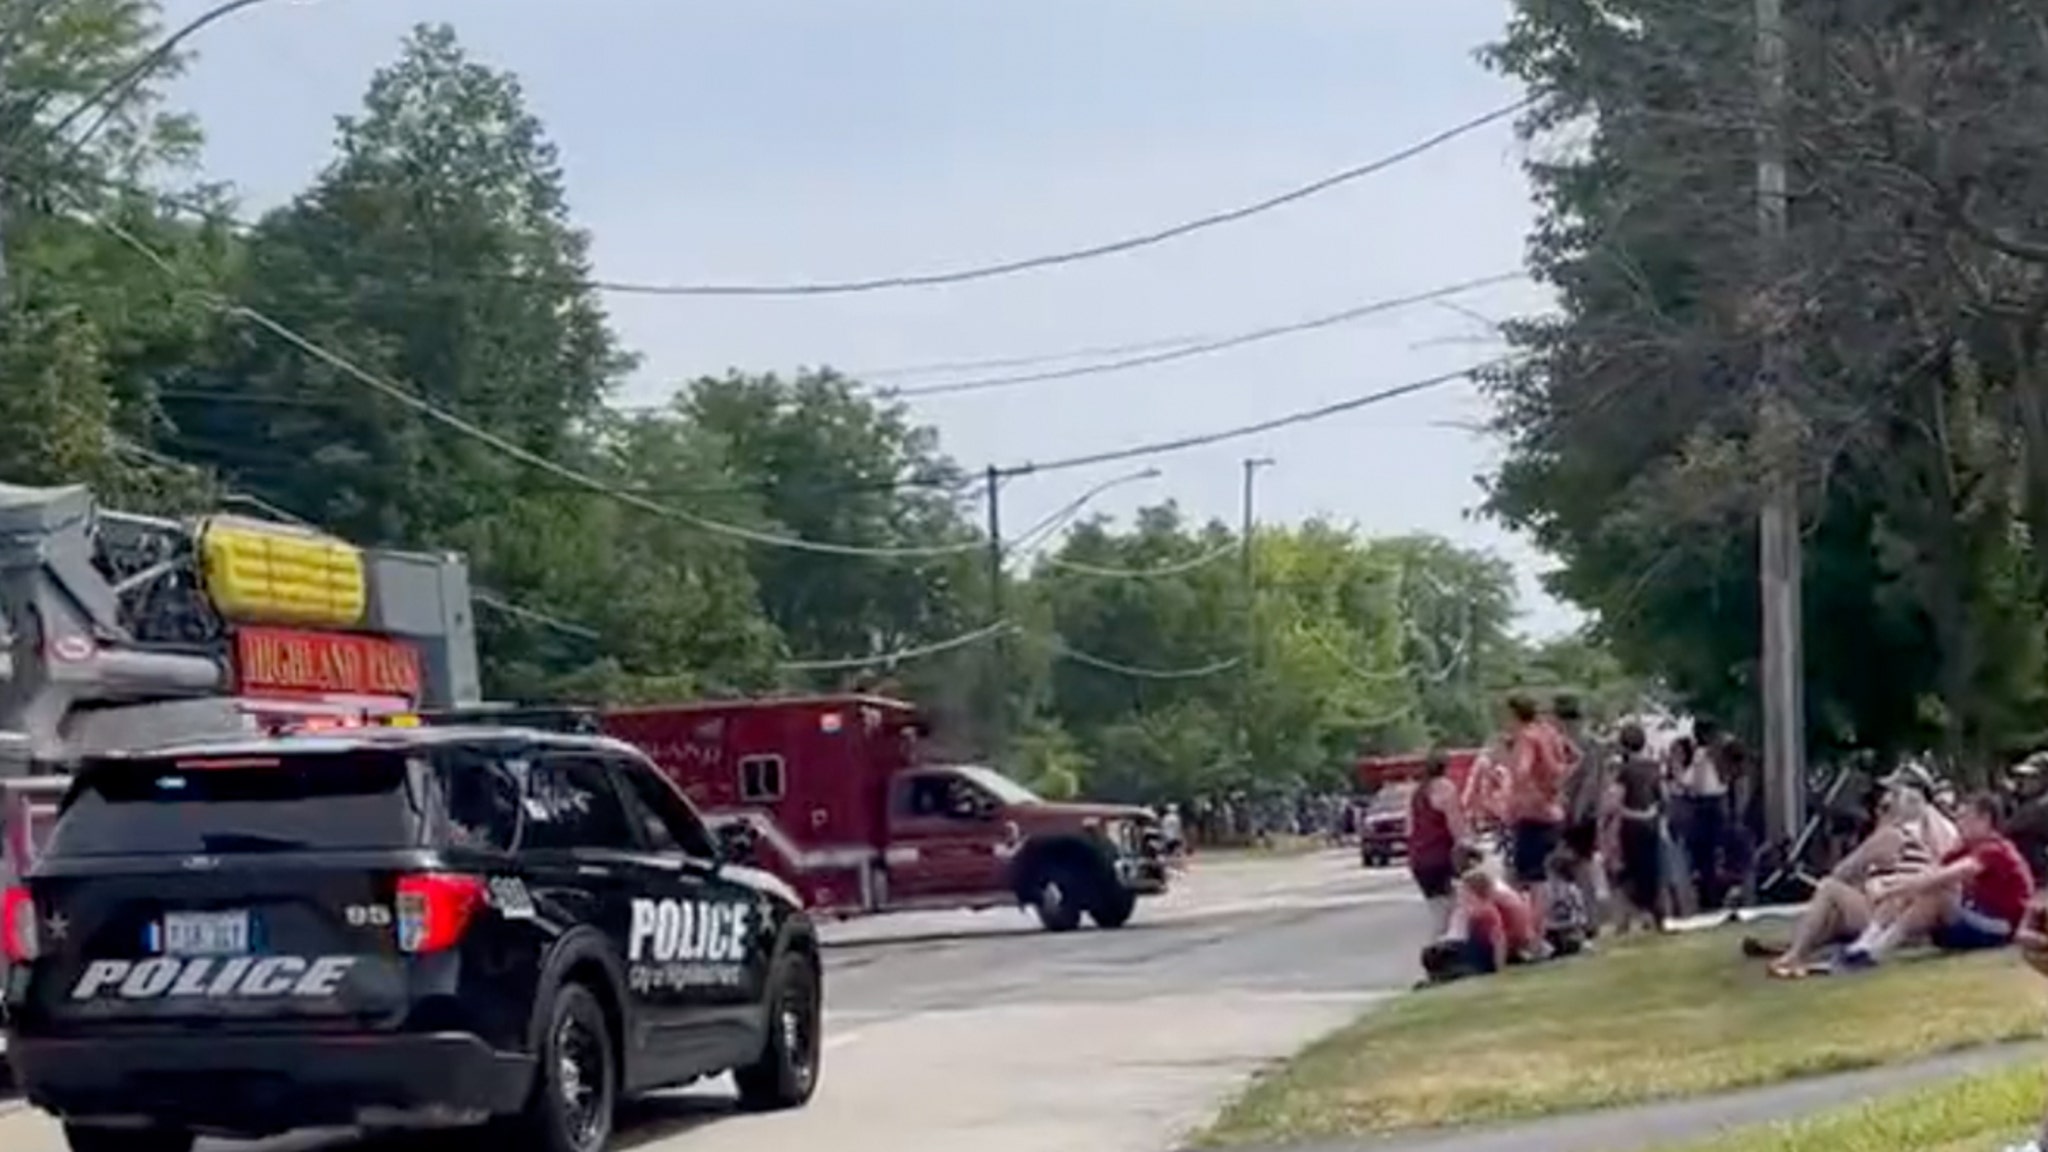 6 Dead in Mass Shooting at July 4th Parade In Chicago Suburb